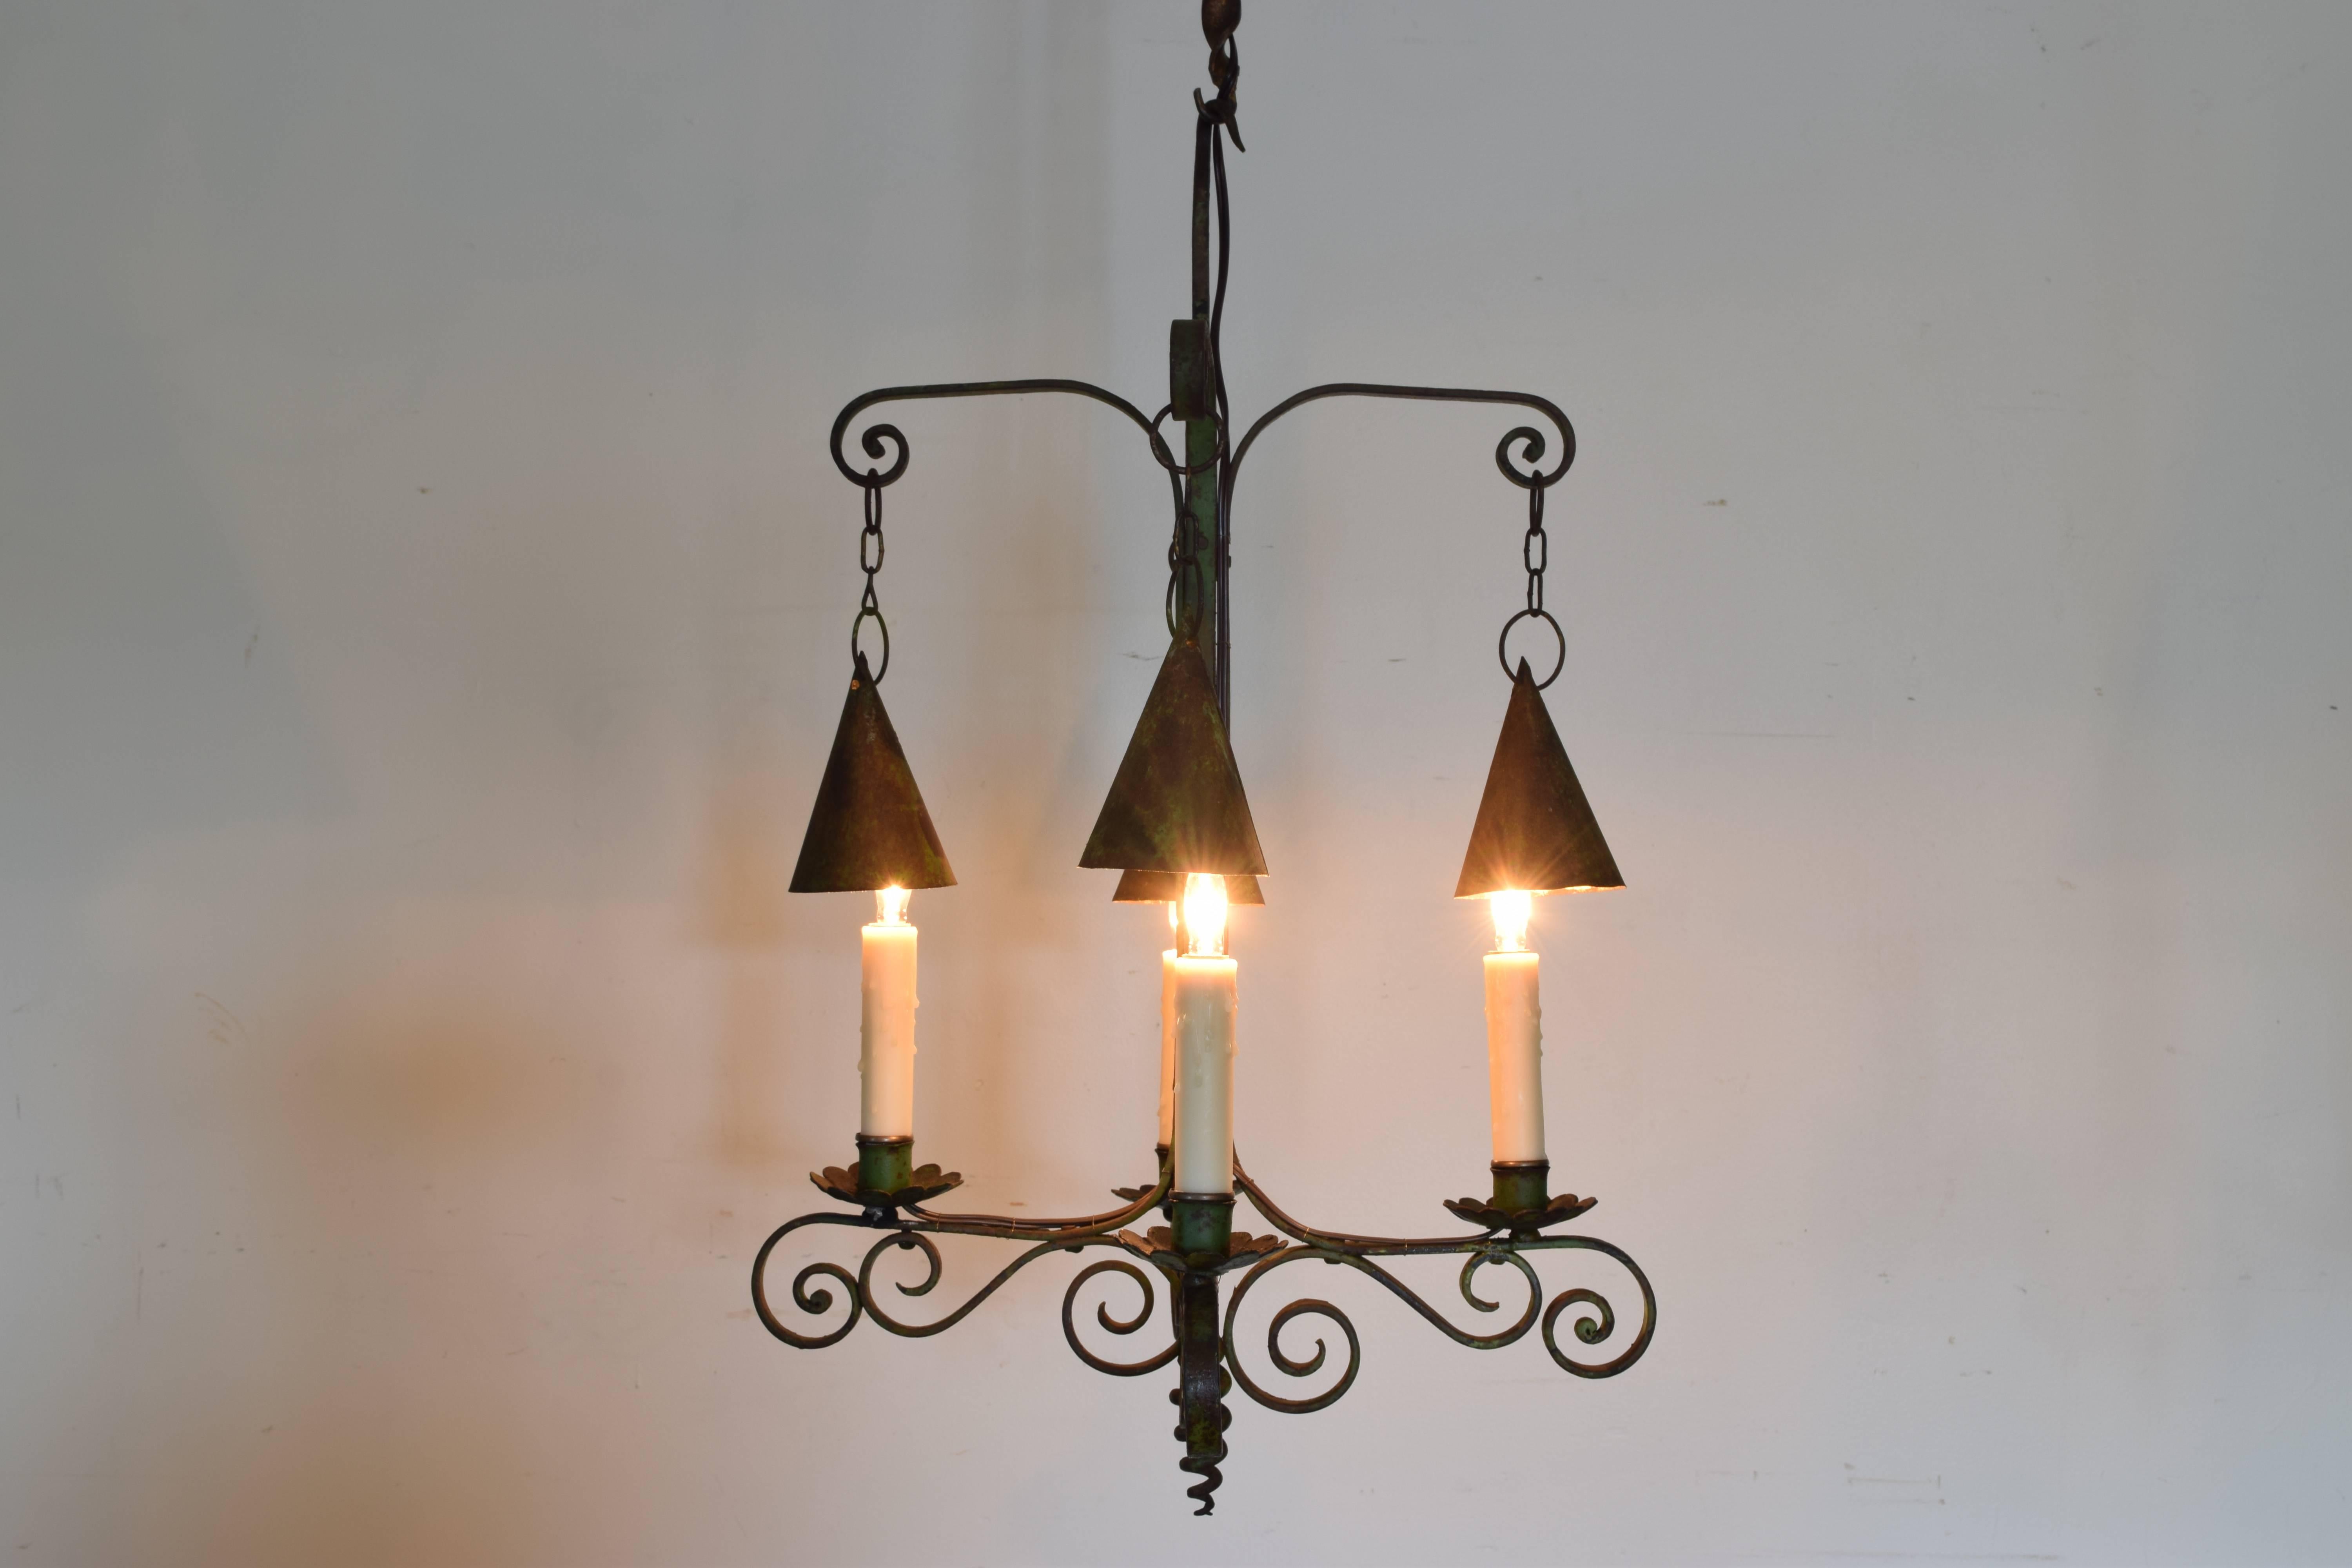 The fixture having four arms, each light with a hanging conic lantern shade above it, the body made up scrolled iron.